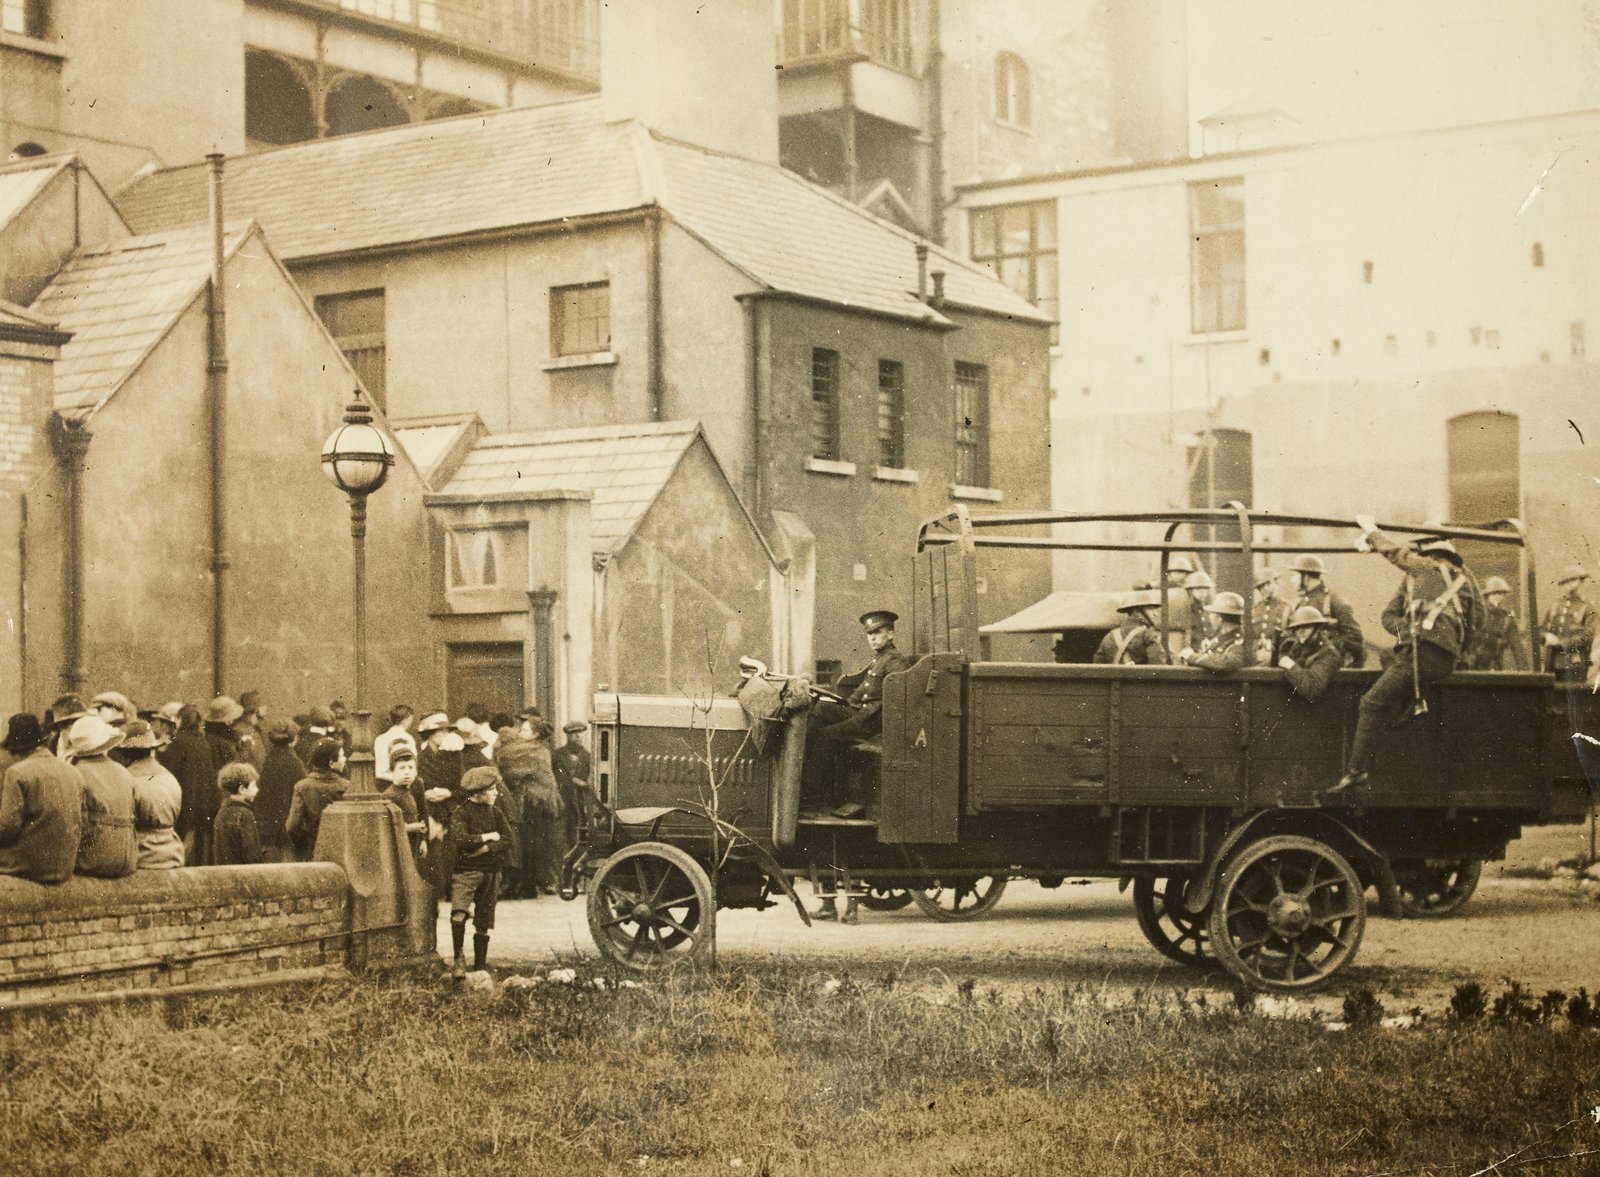 Image - Military and victims' friends in the grounds of Jervis Street Hospital during the Military enquiry into the Croke Park shootings on November 24 1920. Image courtesy of National Library of Ireland